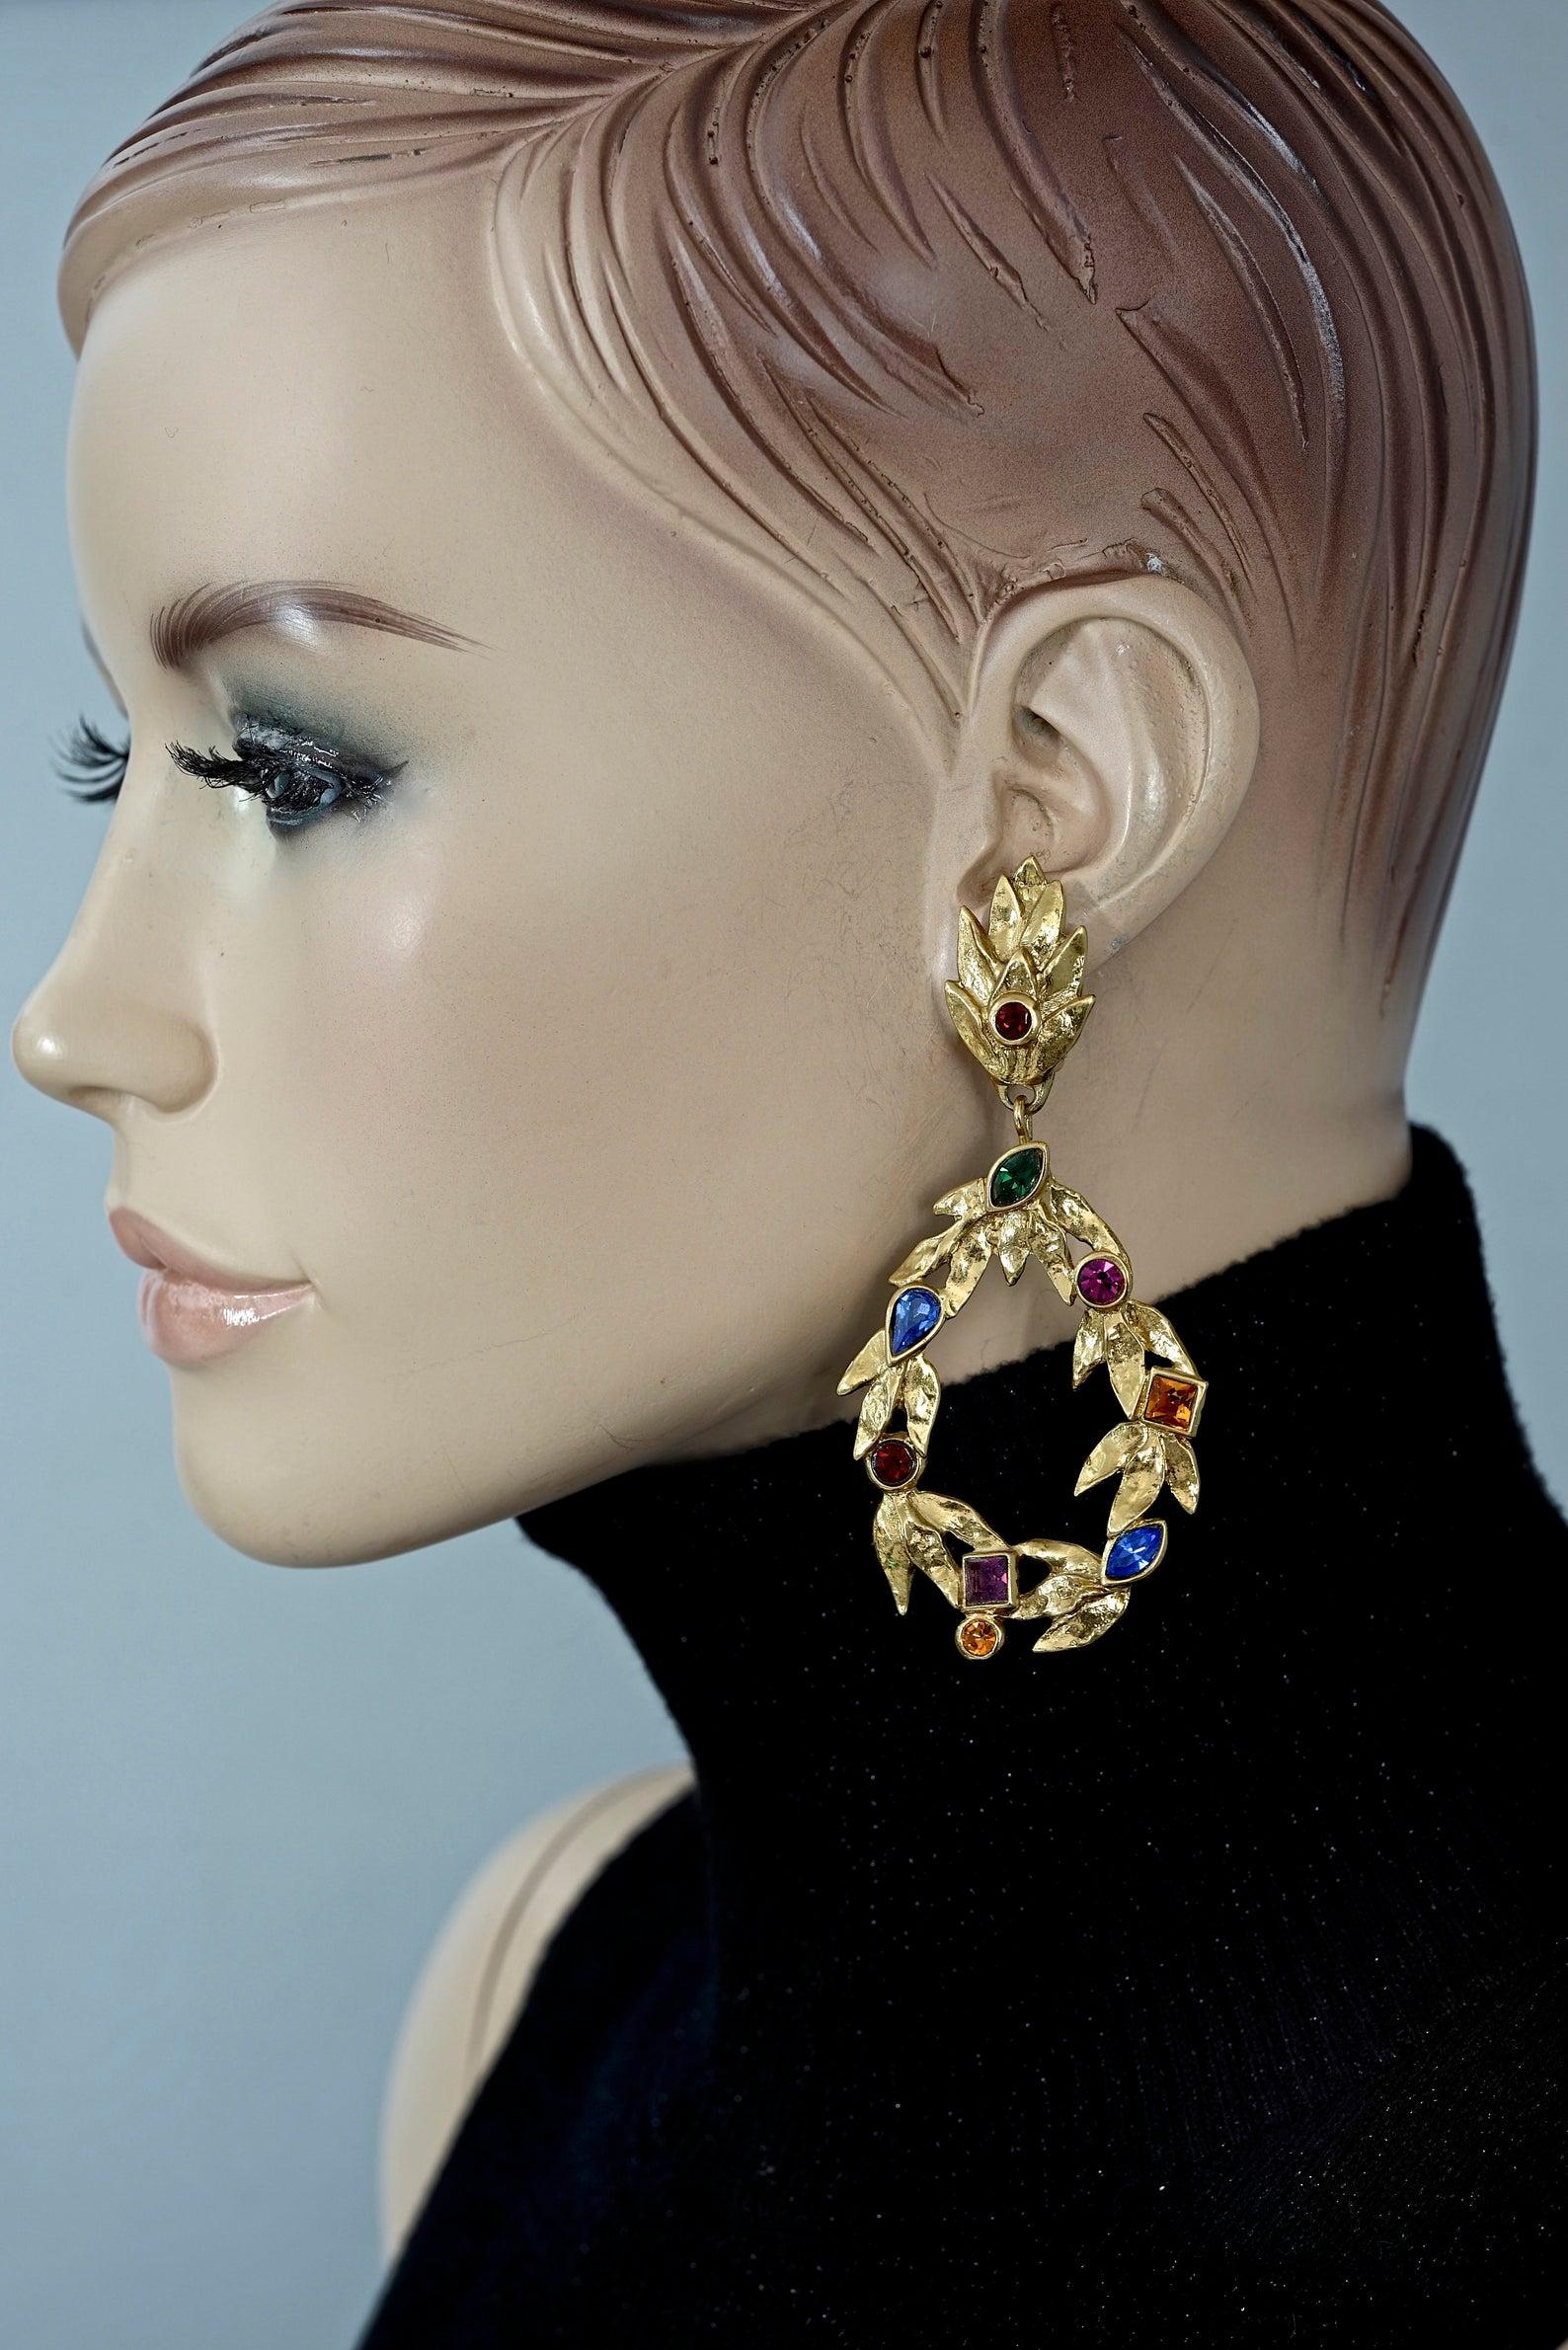 Vintage YVES SAINT LAURENT Ysl by Robert Goossens Jewelled Garland Hoop Earrings

Measurements:
Height: 3.74 inches (9.5 cms)
Width: 1.77 inches (4.5 cms)
Weight per Earring: 23 grams

Features:
- 100% Authentic YVES SAINT LAURENT by Robert